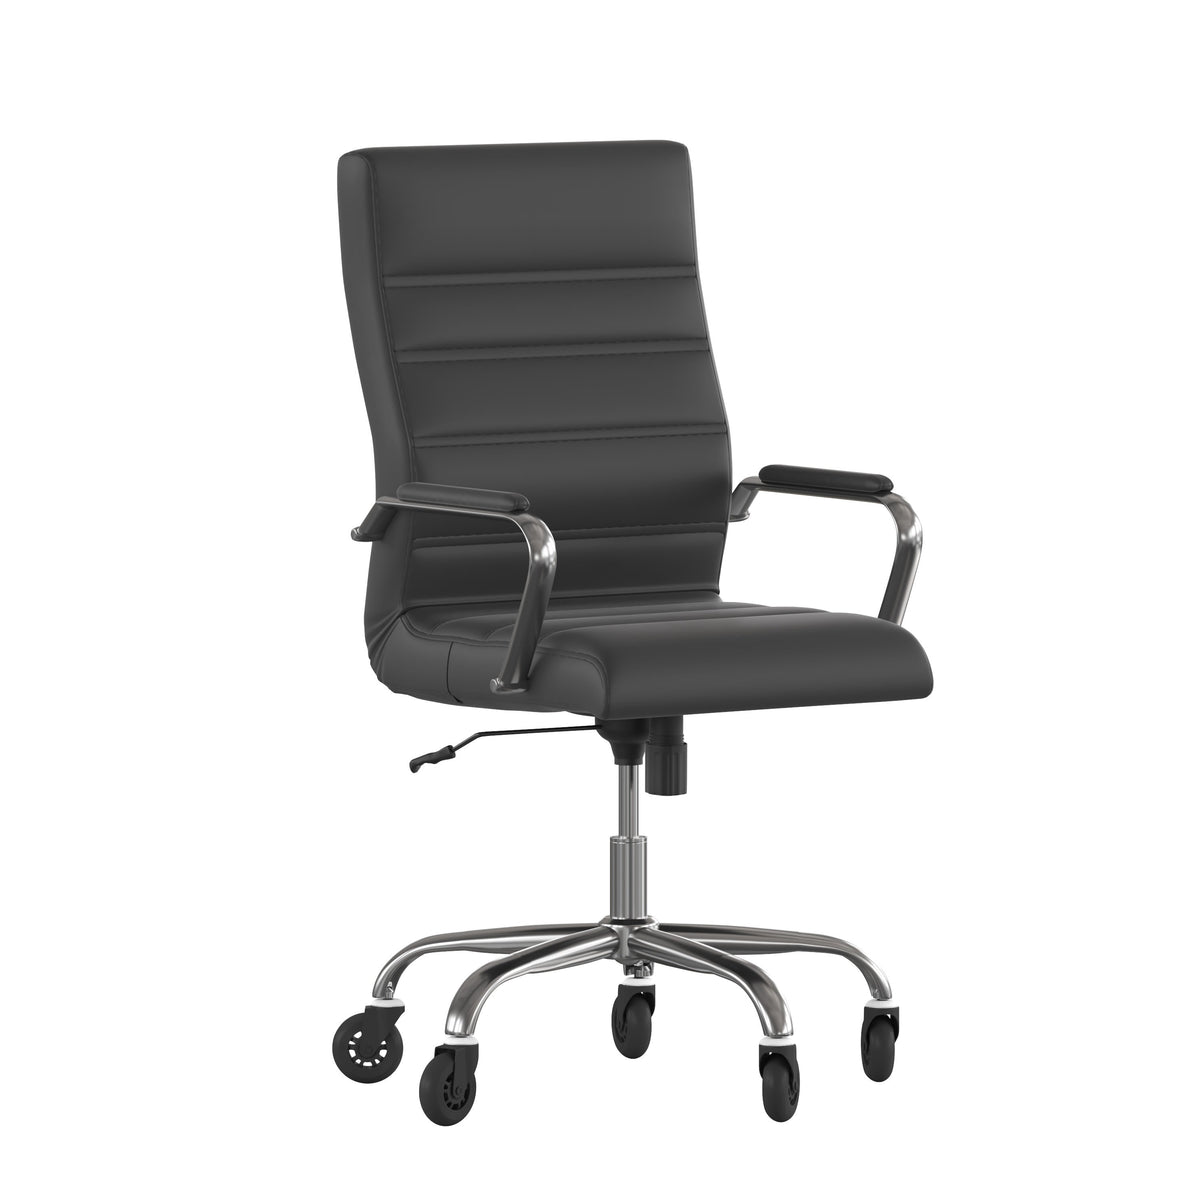 Black LeatherSoft/Chrome Frame |#| Executive Chair with Chrome Frame & Arms on Skate Wheels - Black LeatherSoft